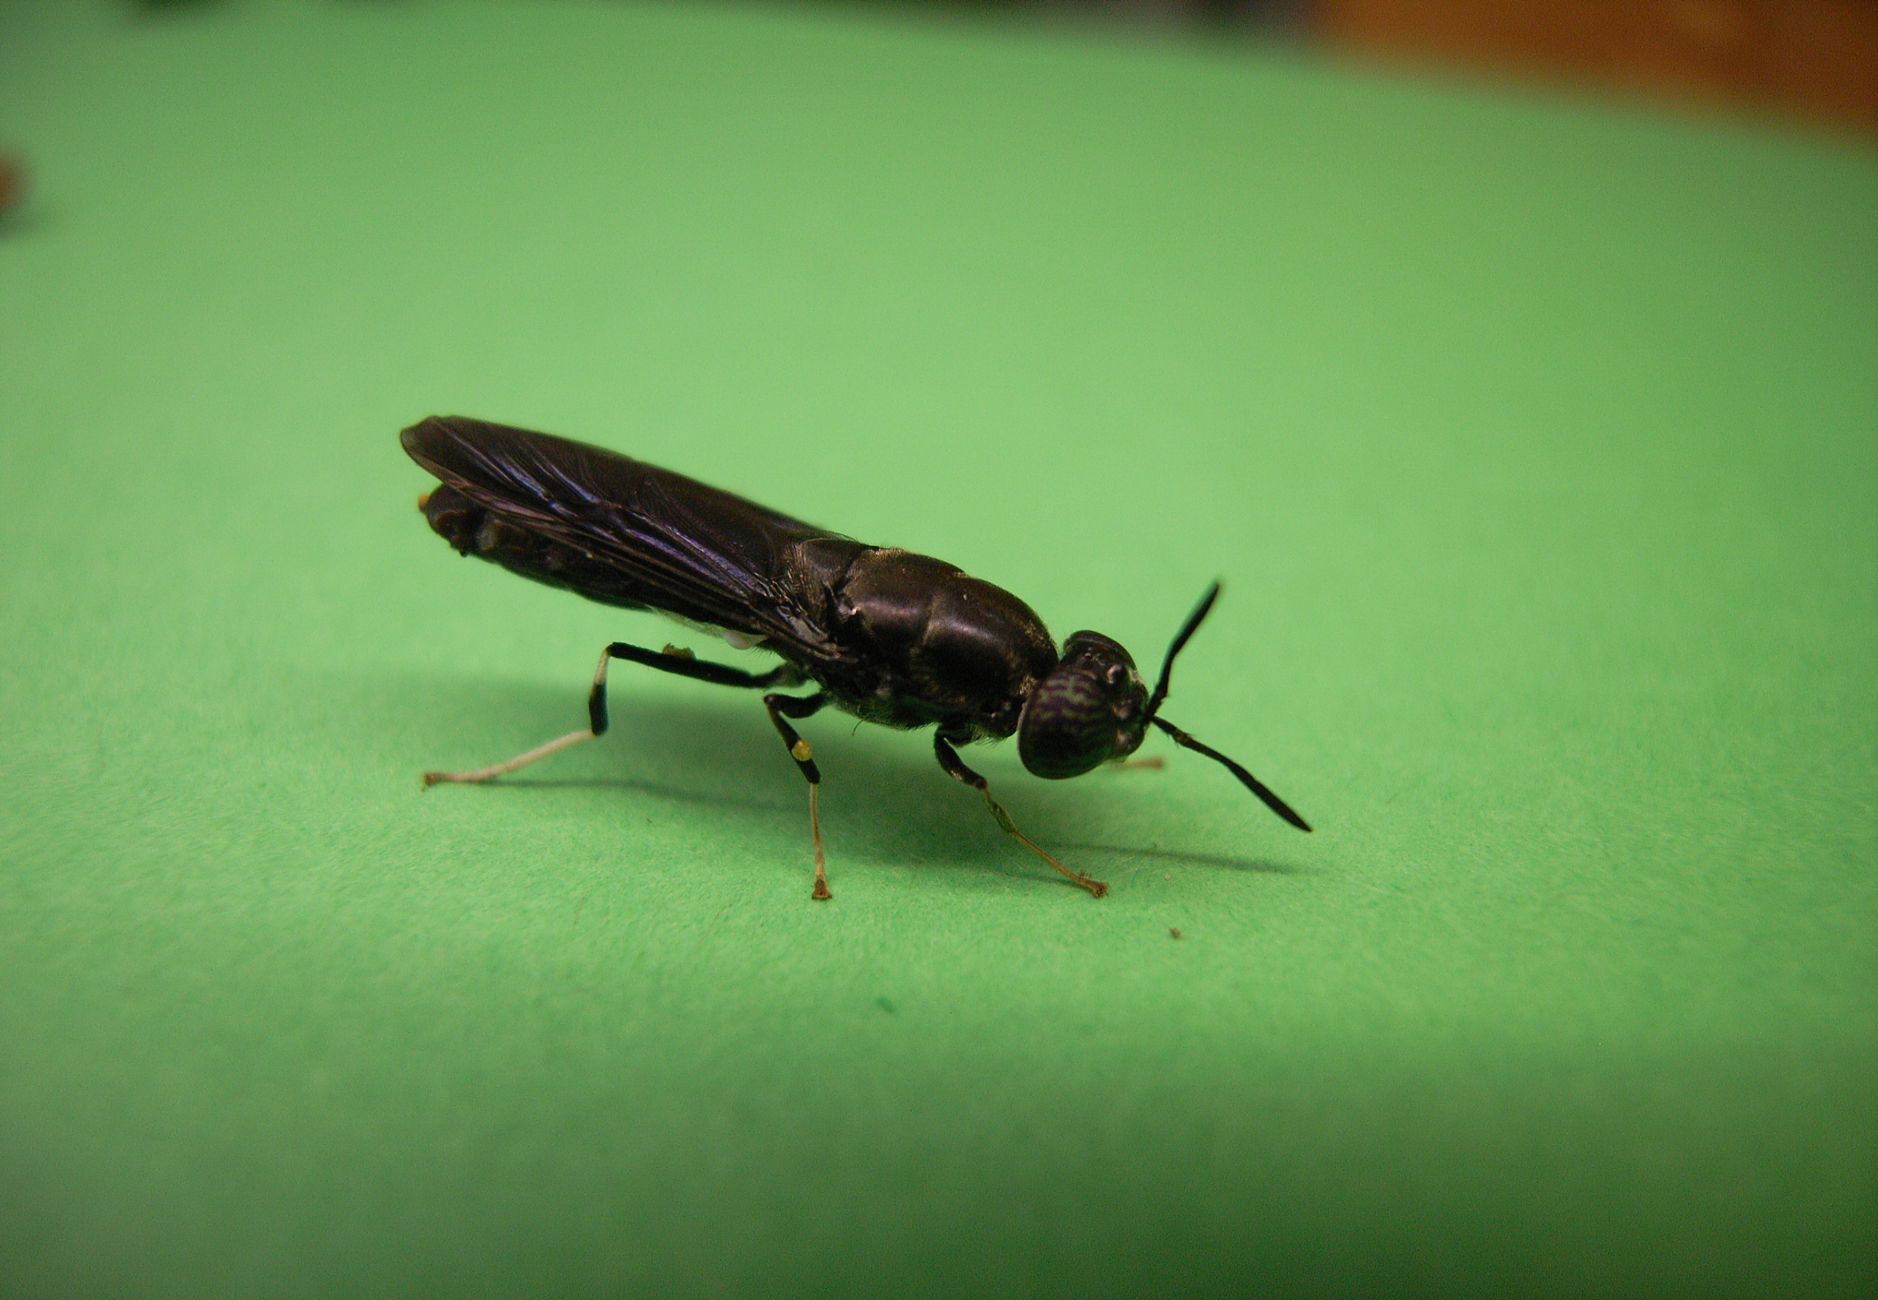 A black fly on a green surface.